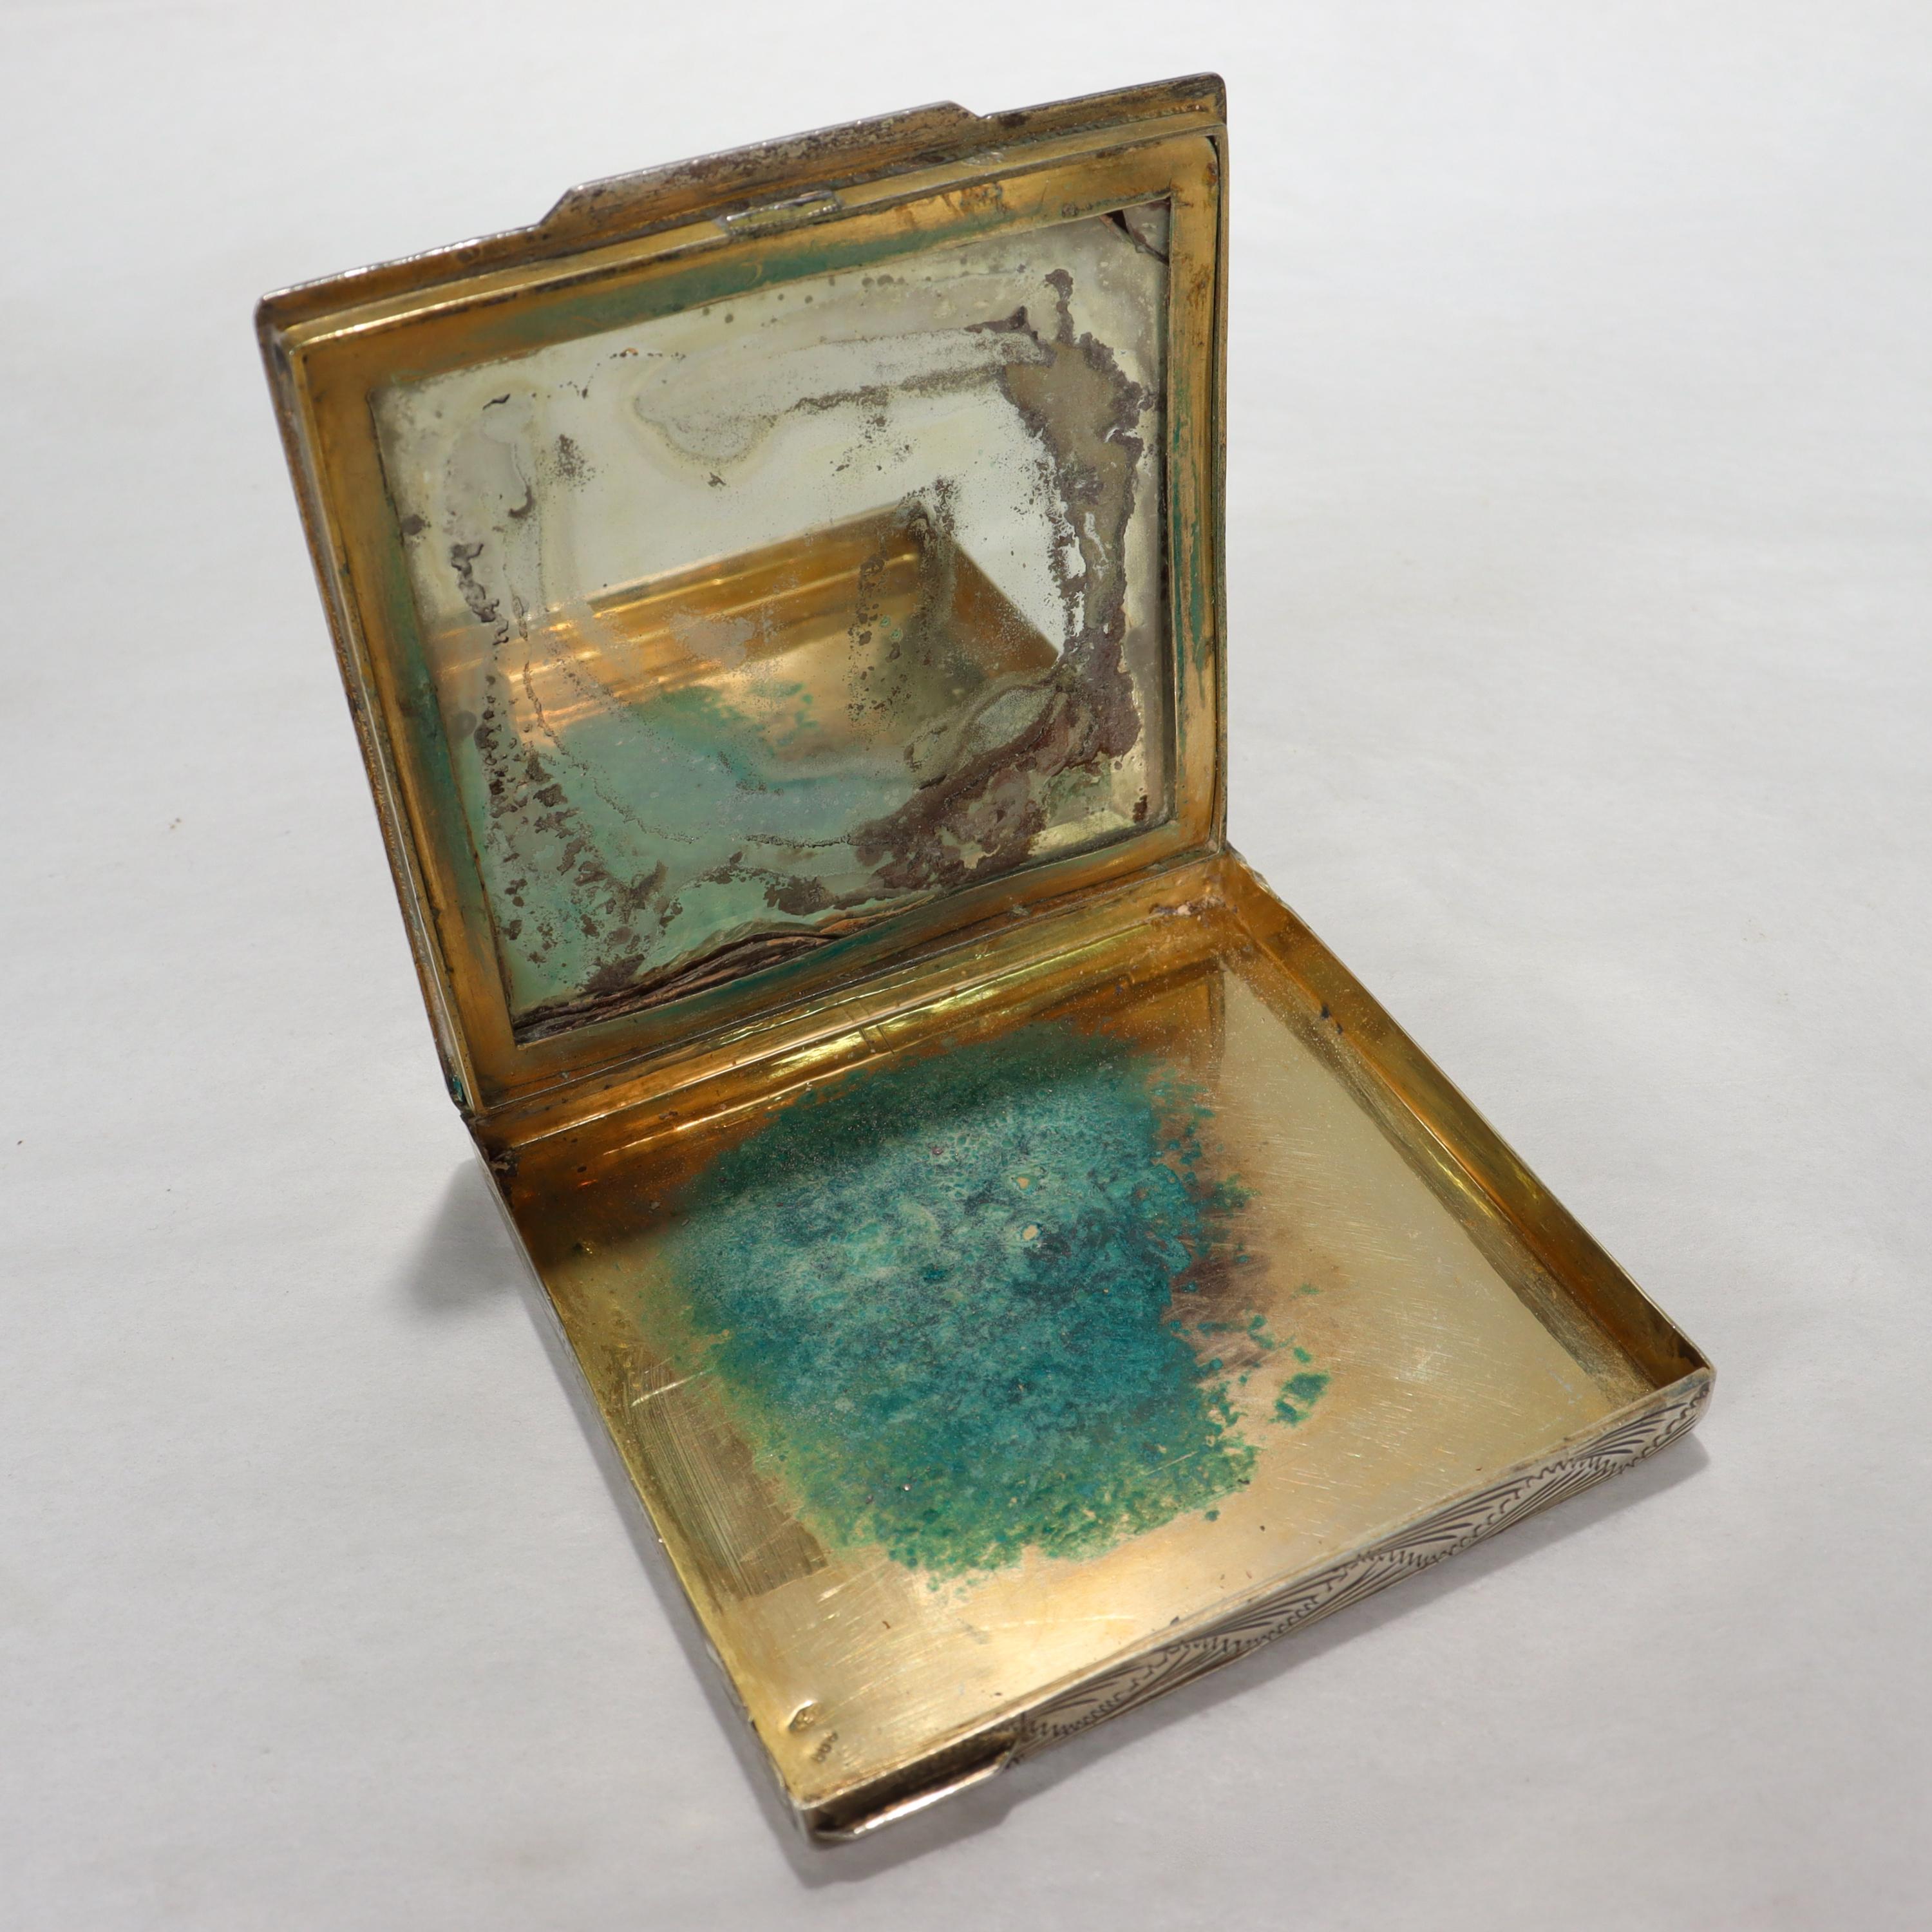 Old or Antique Italian Silver & Enamel Compact with its Original Box For Sale 7